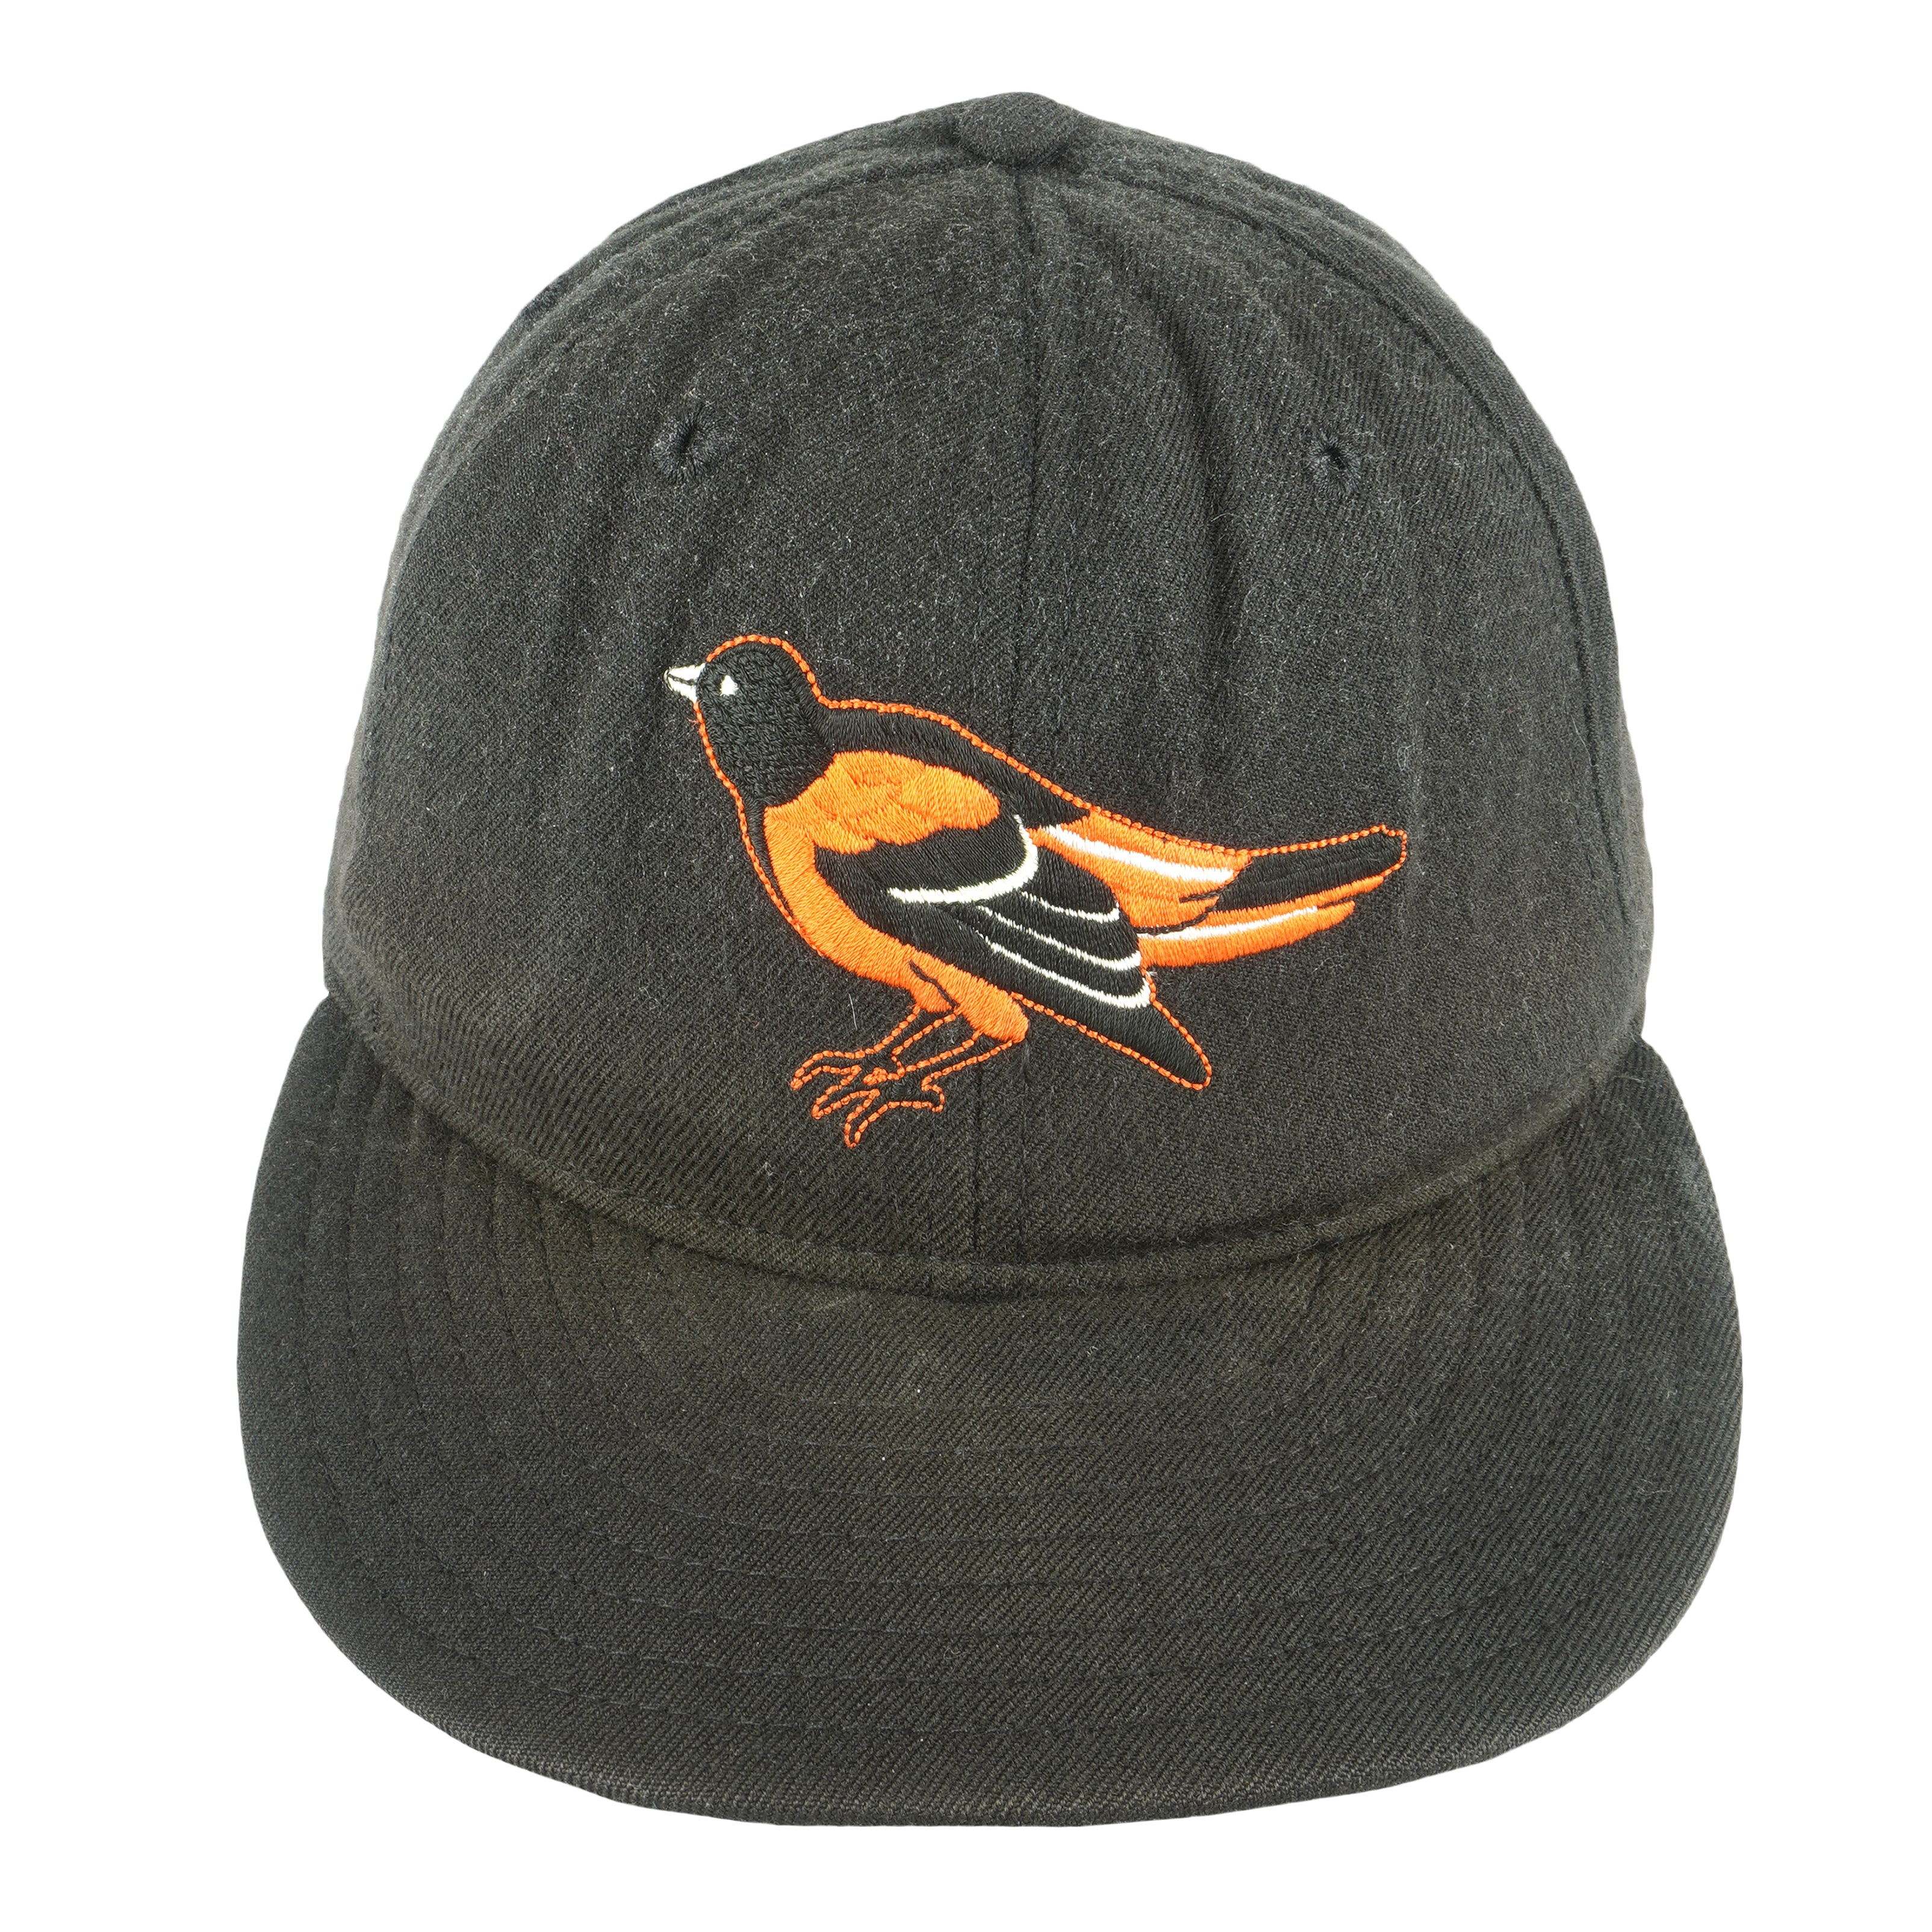 Baltimore Orioles New Era Fitted Hat Unisex Black/Orange New with Tags  7-1/2